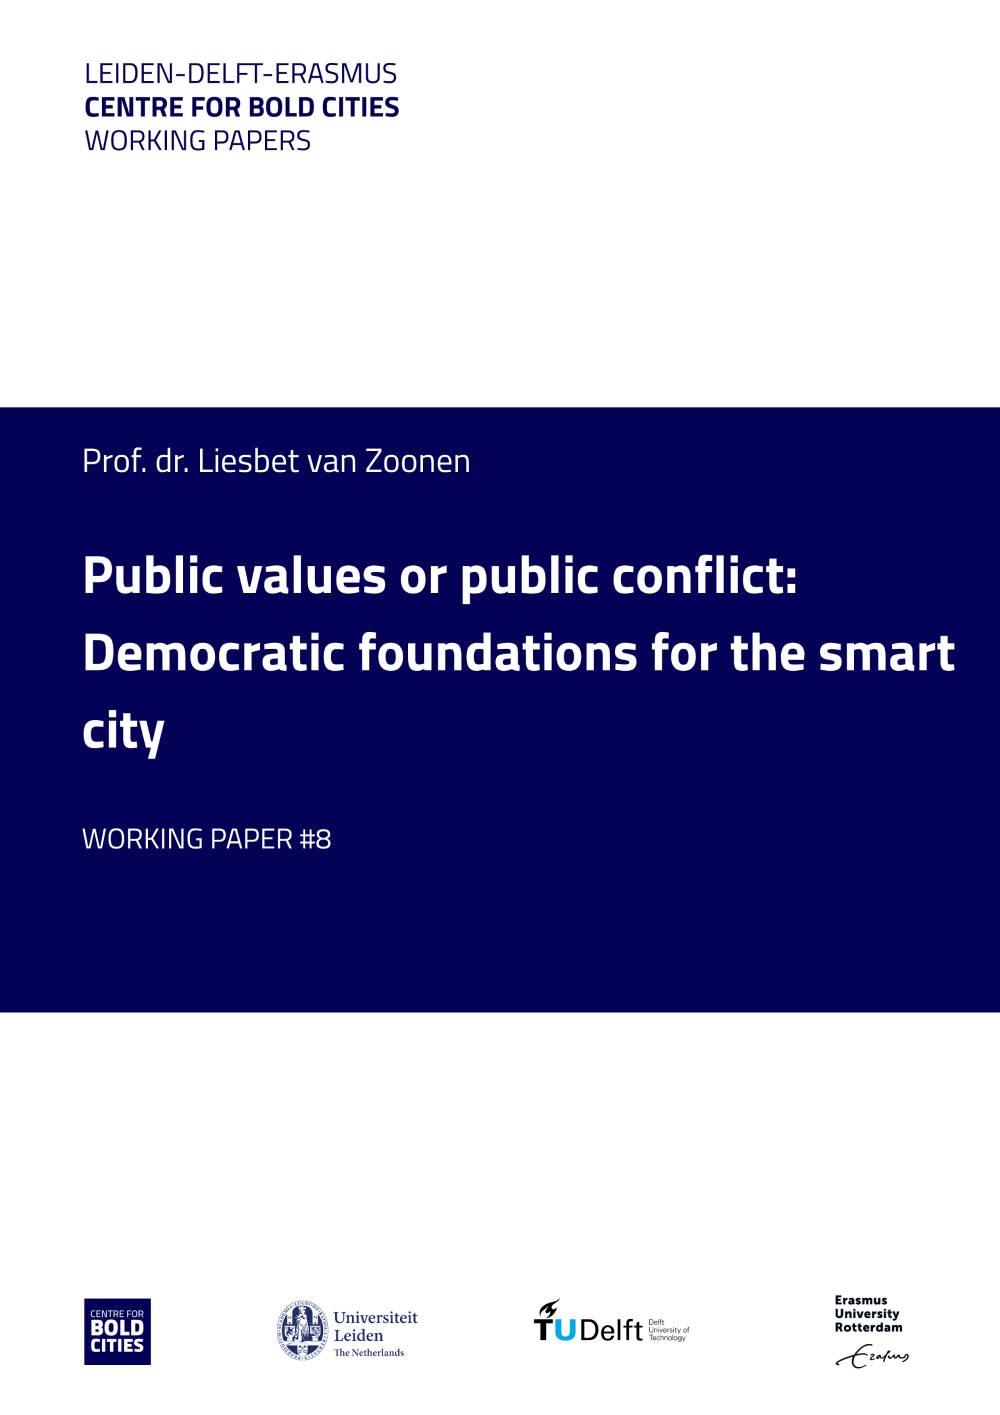 Working paper 8: Public values or public conflict: Democratic foundations for the smart city